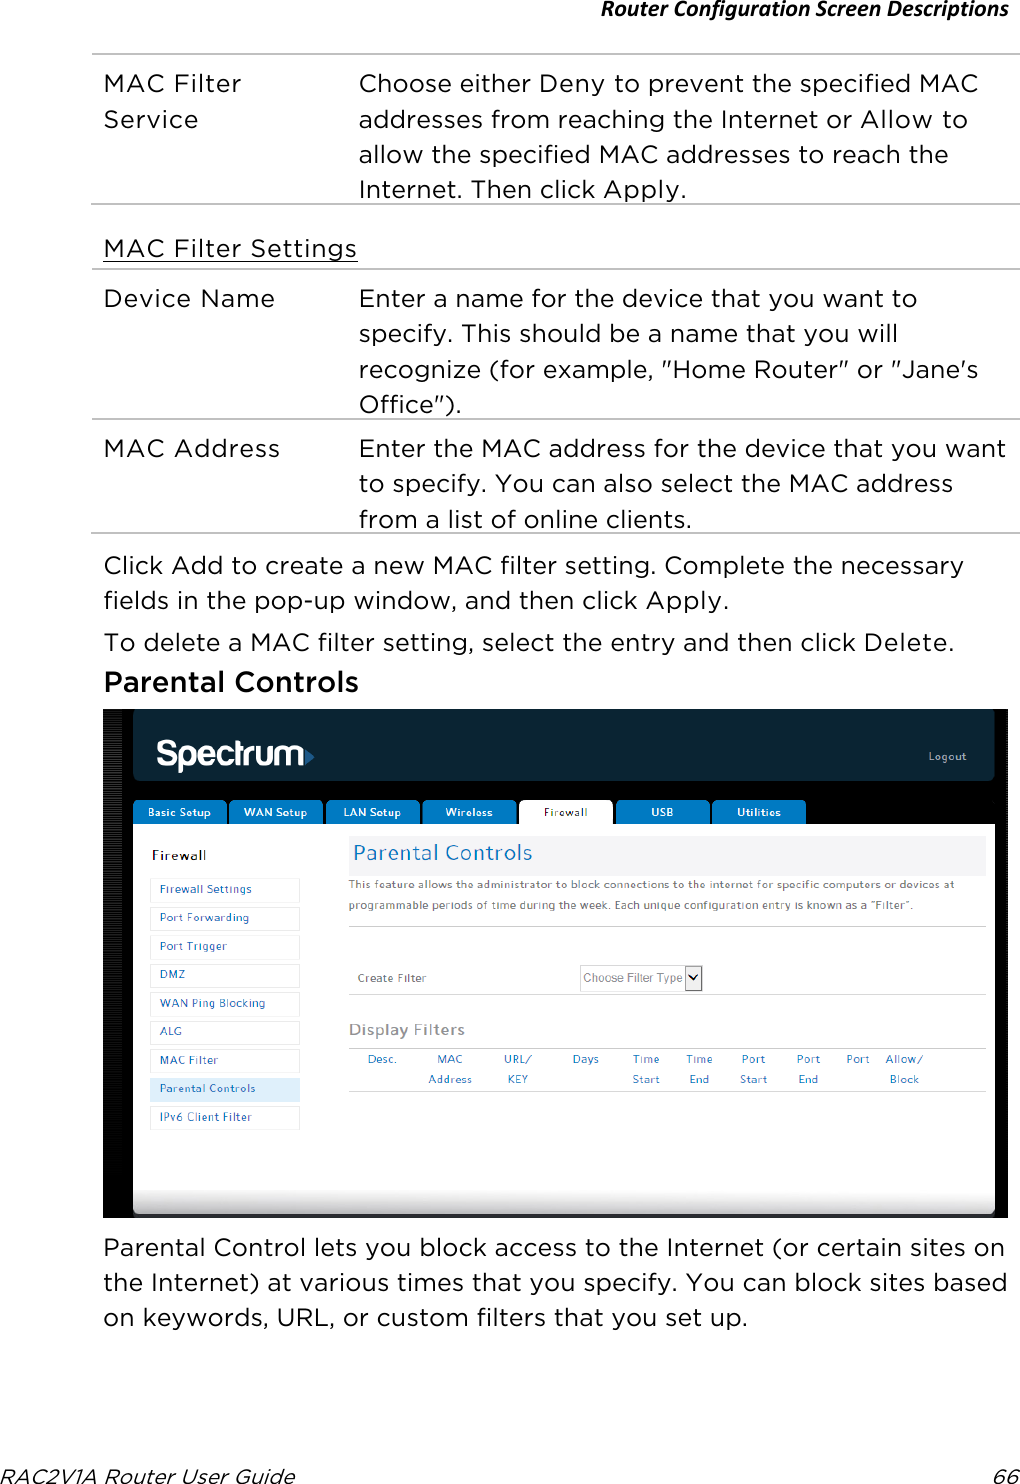 Router Configuration Screen Descriptions  RAC2V1A Router User Guide 66  MAC Filter Service Choose either Deny to prevent the specified MAC addresses from reaching the Internet or Allow to allow the specified MAC addresses to reach the Internet. Then click Apply. MAC Filter Settings Device Name Enter a name for the device that you want to specify. This should be a name that you will recognize (for example, &quot;Home Router&quot; or &quot;Jane&apos;s Office&quot;). MAC Address Enter the MAC address for the device that you want to specify. You can also select the MAC address from a list of online clients.   Click Add to create a new MAC filter setting. Complete the necessary fields in the pop-up window, and then click Apply. To delete a MAC filter setting, select the entry and then click Delete.  Parental Controls  Parental Control lets you block access to the Internet (or certain sites on the Internet) at various times that you specify. You can block sites based on keywords, URL, or custom filters that you set up. 